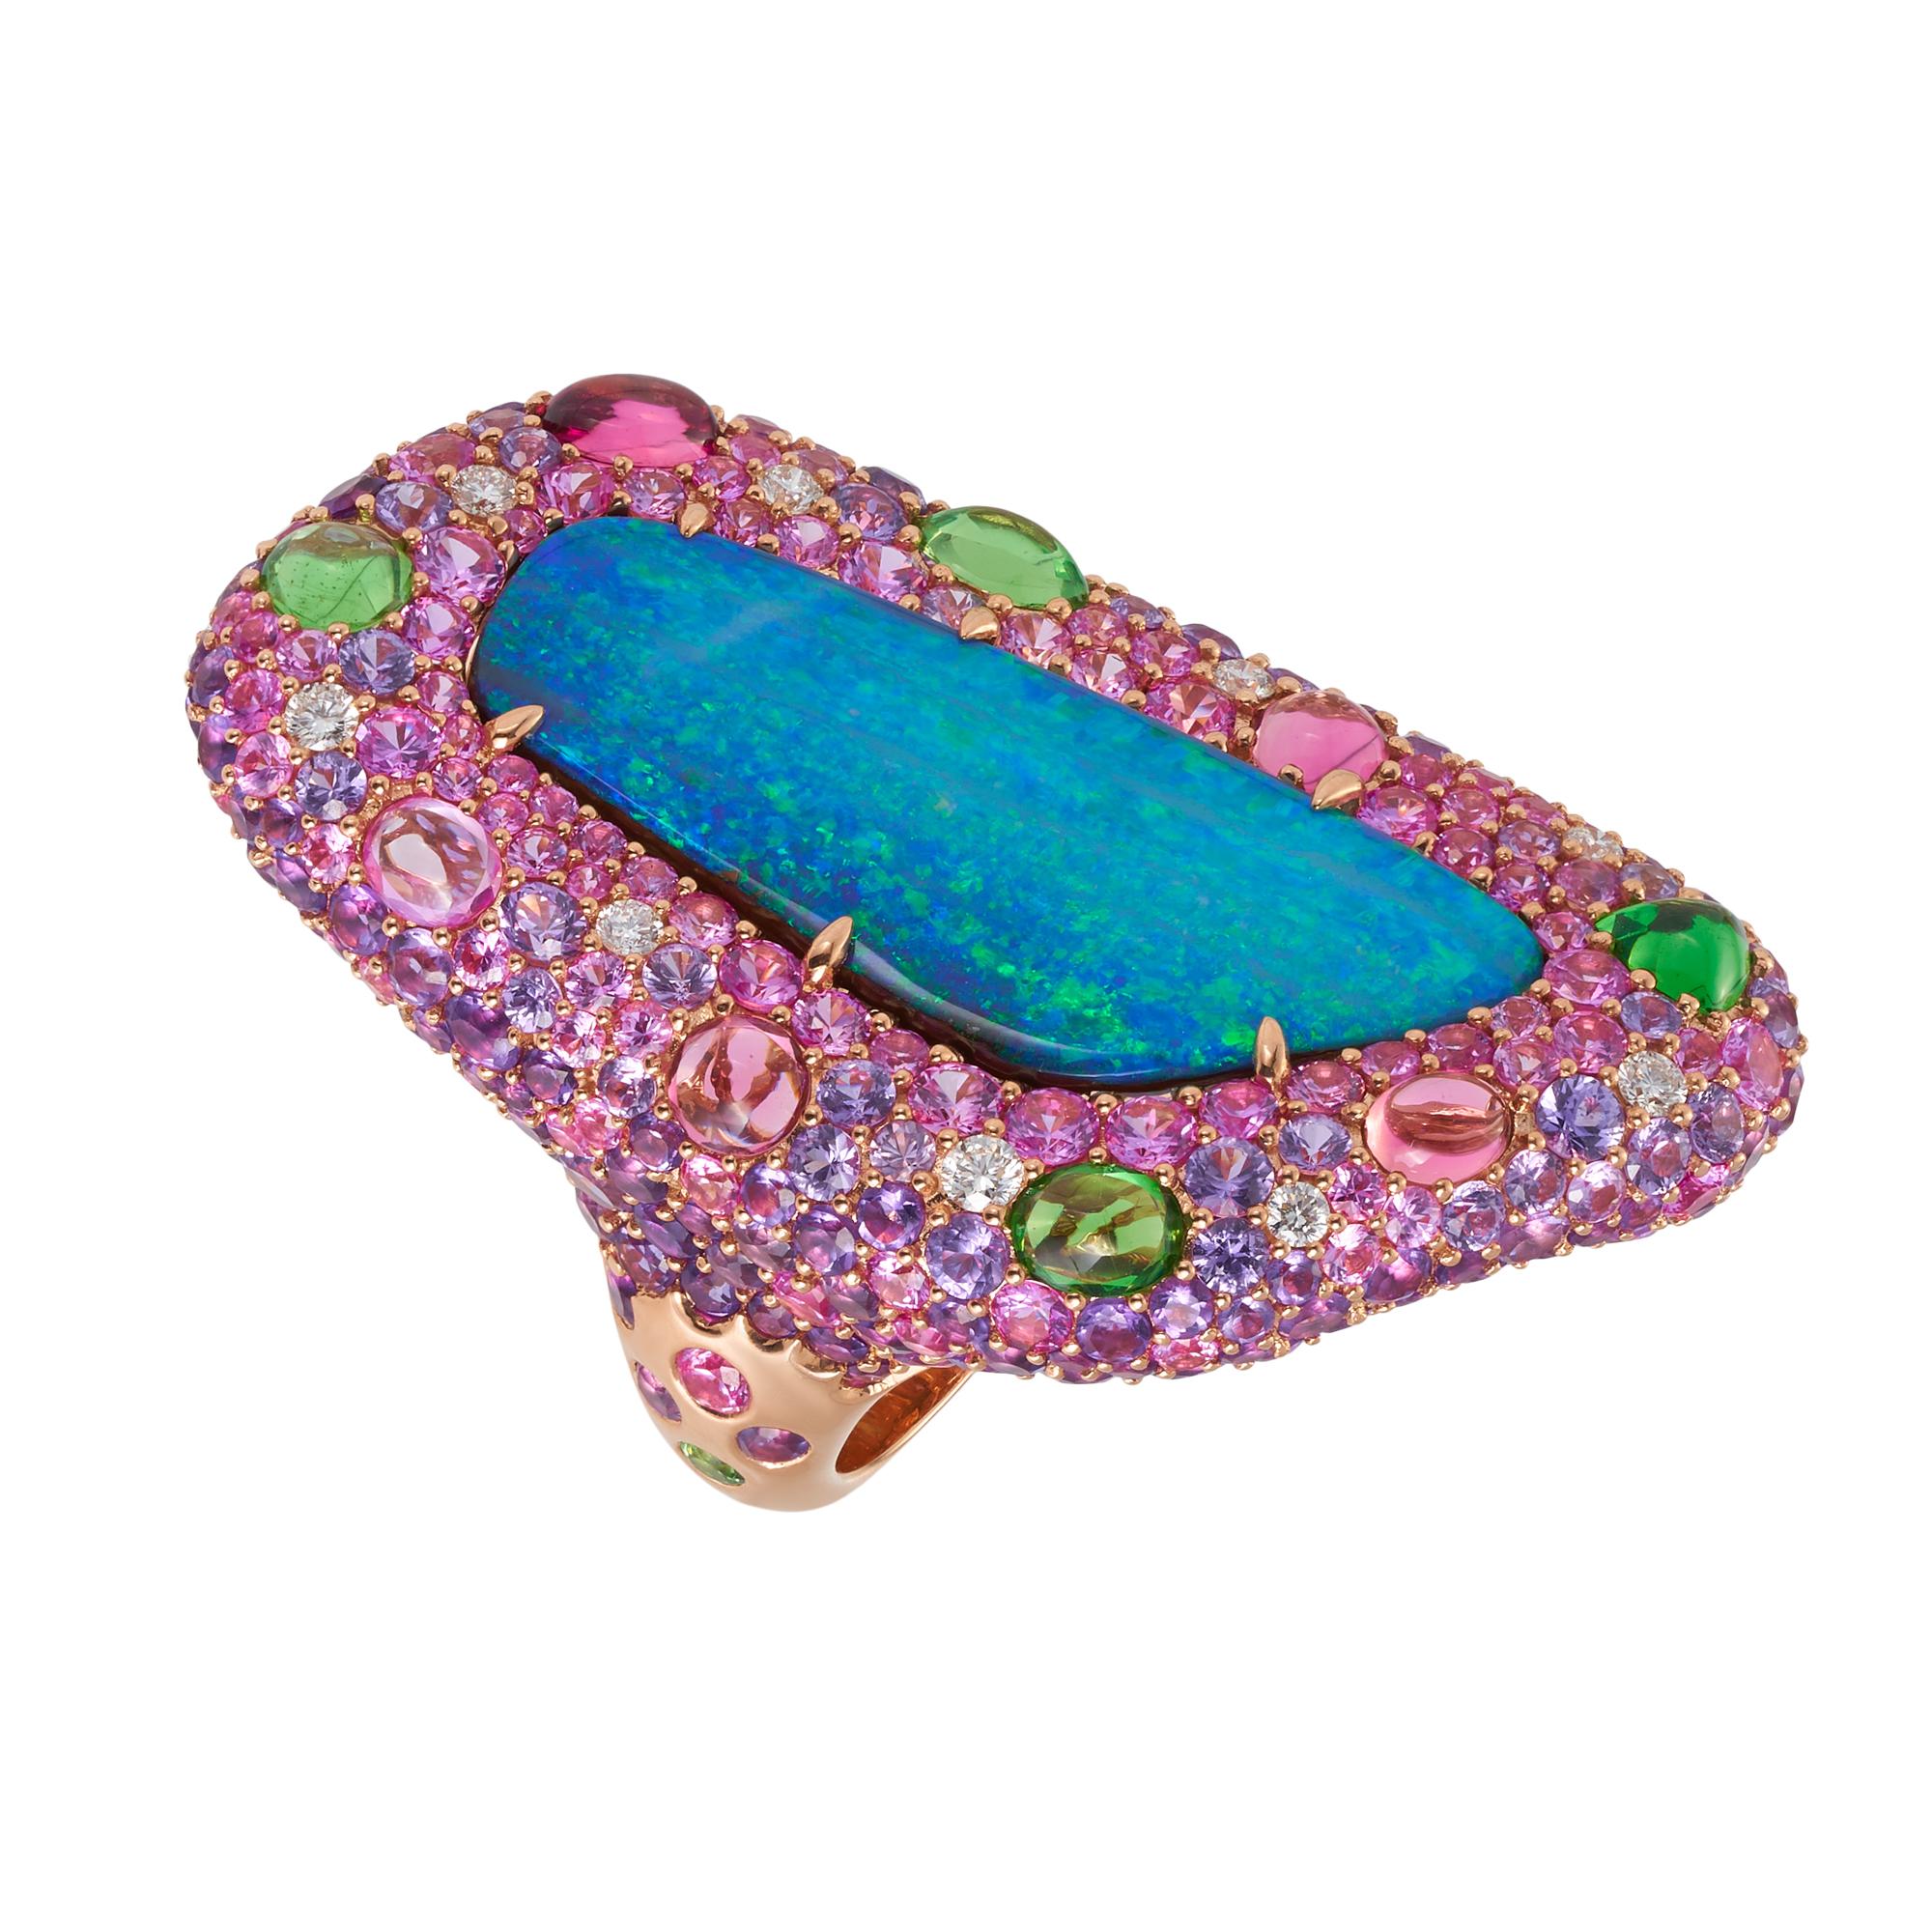 18karat Rose Gold Opal Ring, featuring a 14.10ct Natural Queensland Boulder Opal, surrounded by diamonds 0.25ct, pink sapphires 3.66cts, purple sapphire 1.88cts, tsavorites 1.31cts, amethyst 4.84cts, pink tourmaline 0.98ct and rhodolite 1.64cts. 